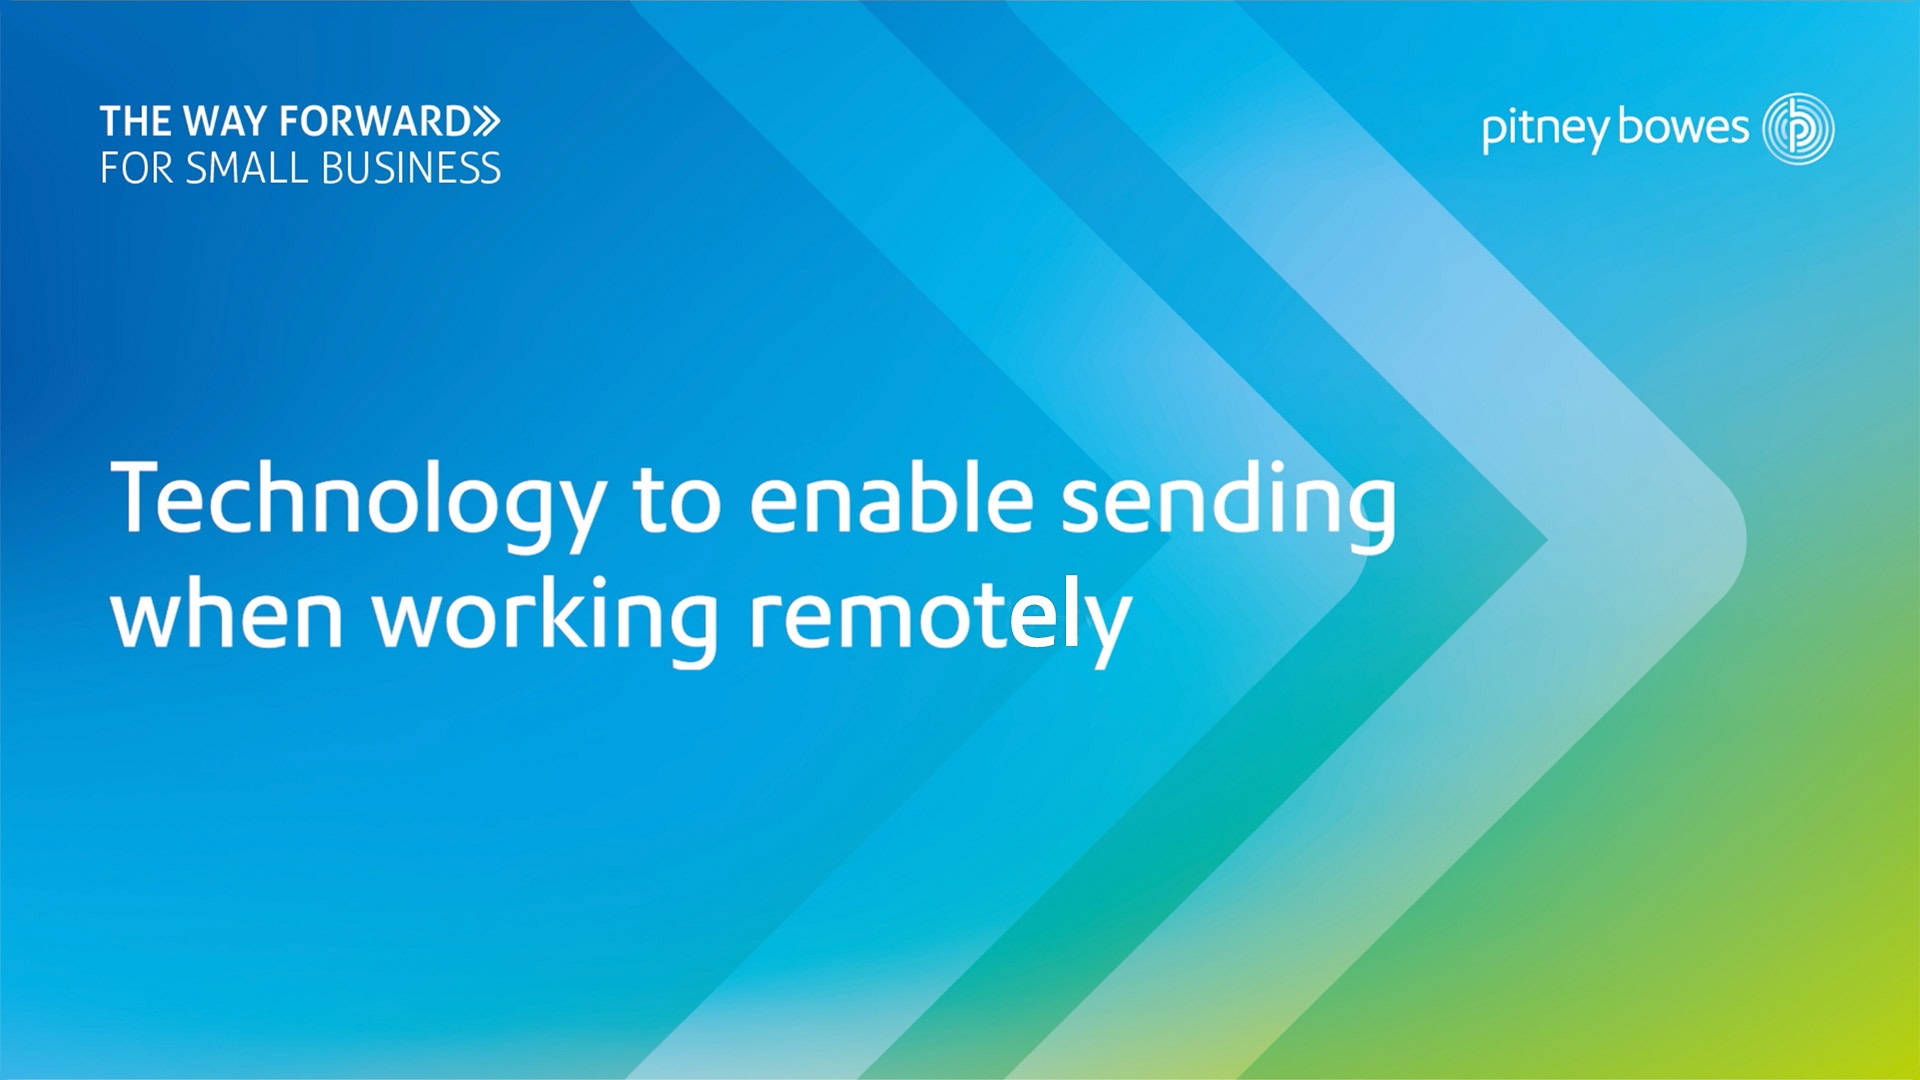 Technology to enable sending when working remotely